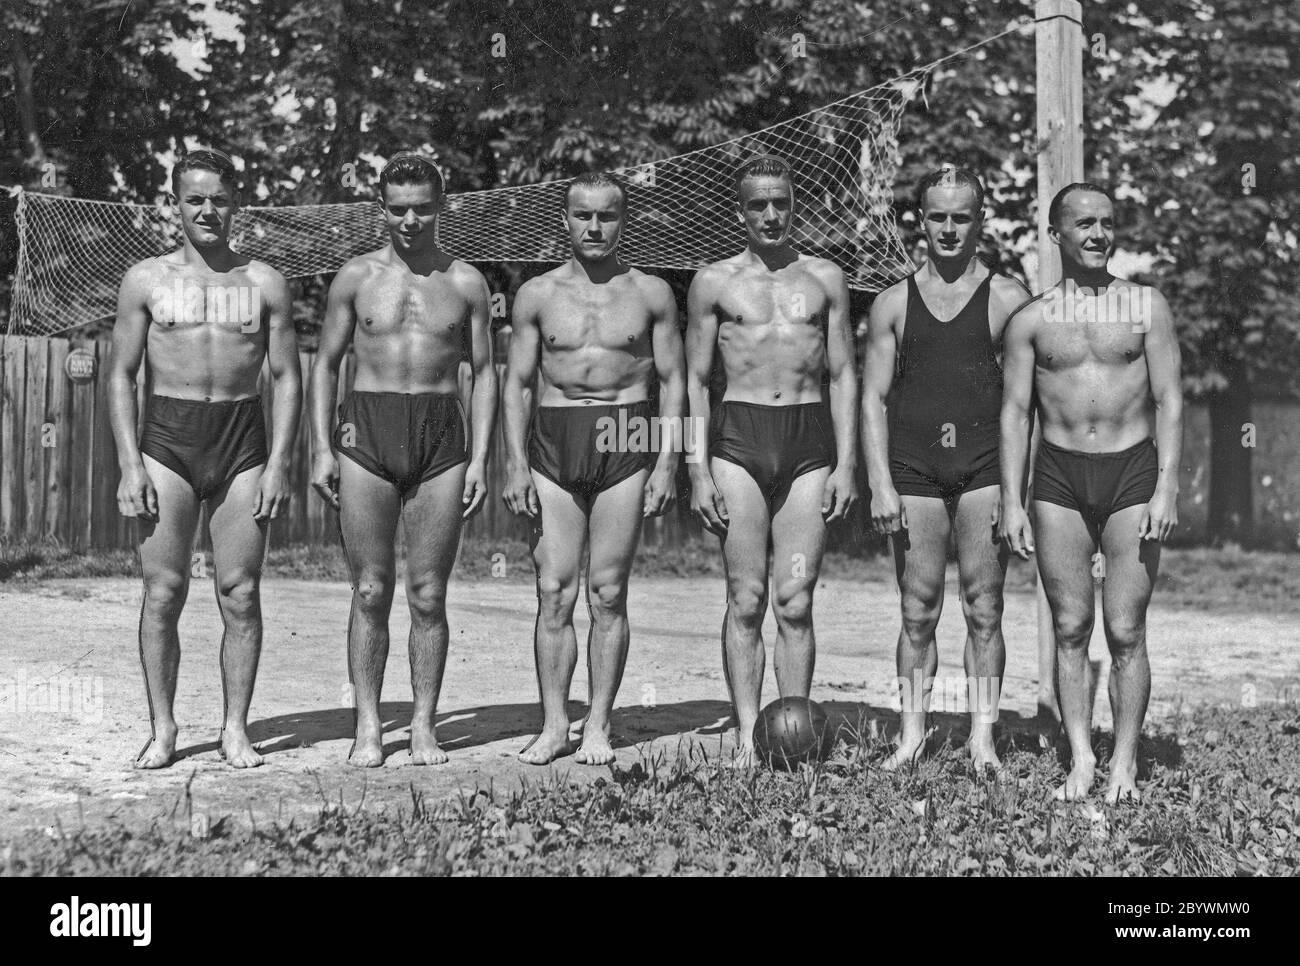 Physical Education Center in Łobzów. Skiers at the training camp in Krakow. Polish representatives in skiing during training at the pool of the Physical Education Center in Łobzów. They are standing from the right: Bronisław Czech, Marian Orlewicz, Michał Górski, Stnisław Karpiel, Jan Bochenek, Andrzej Marusarz are standing. Stock Photo